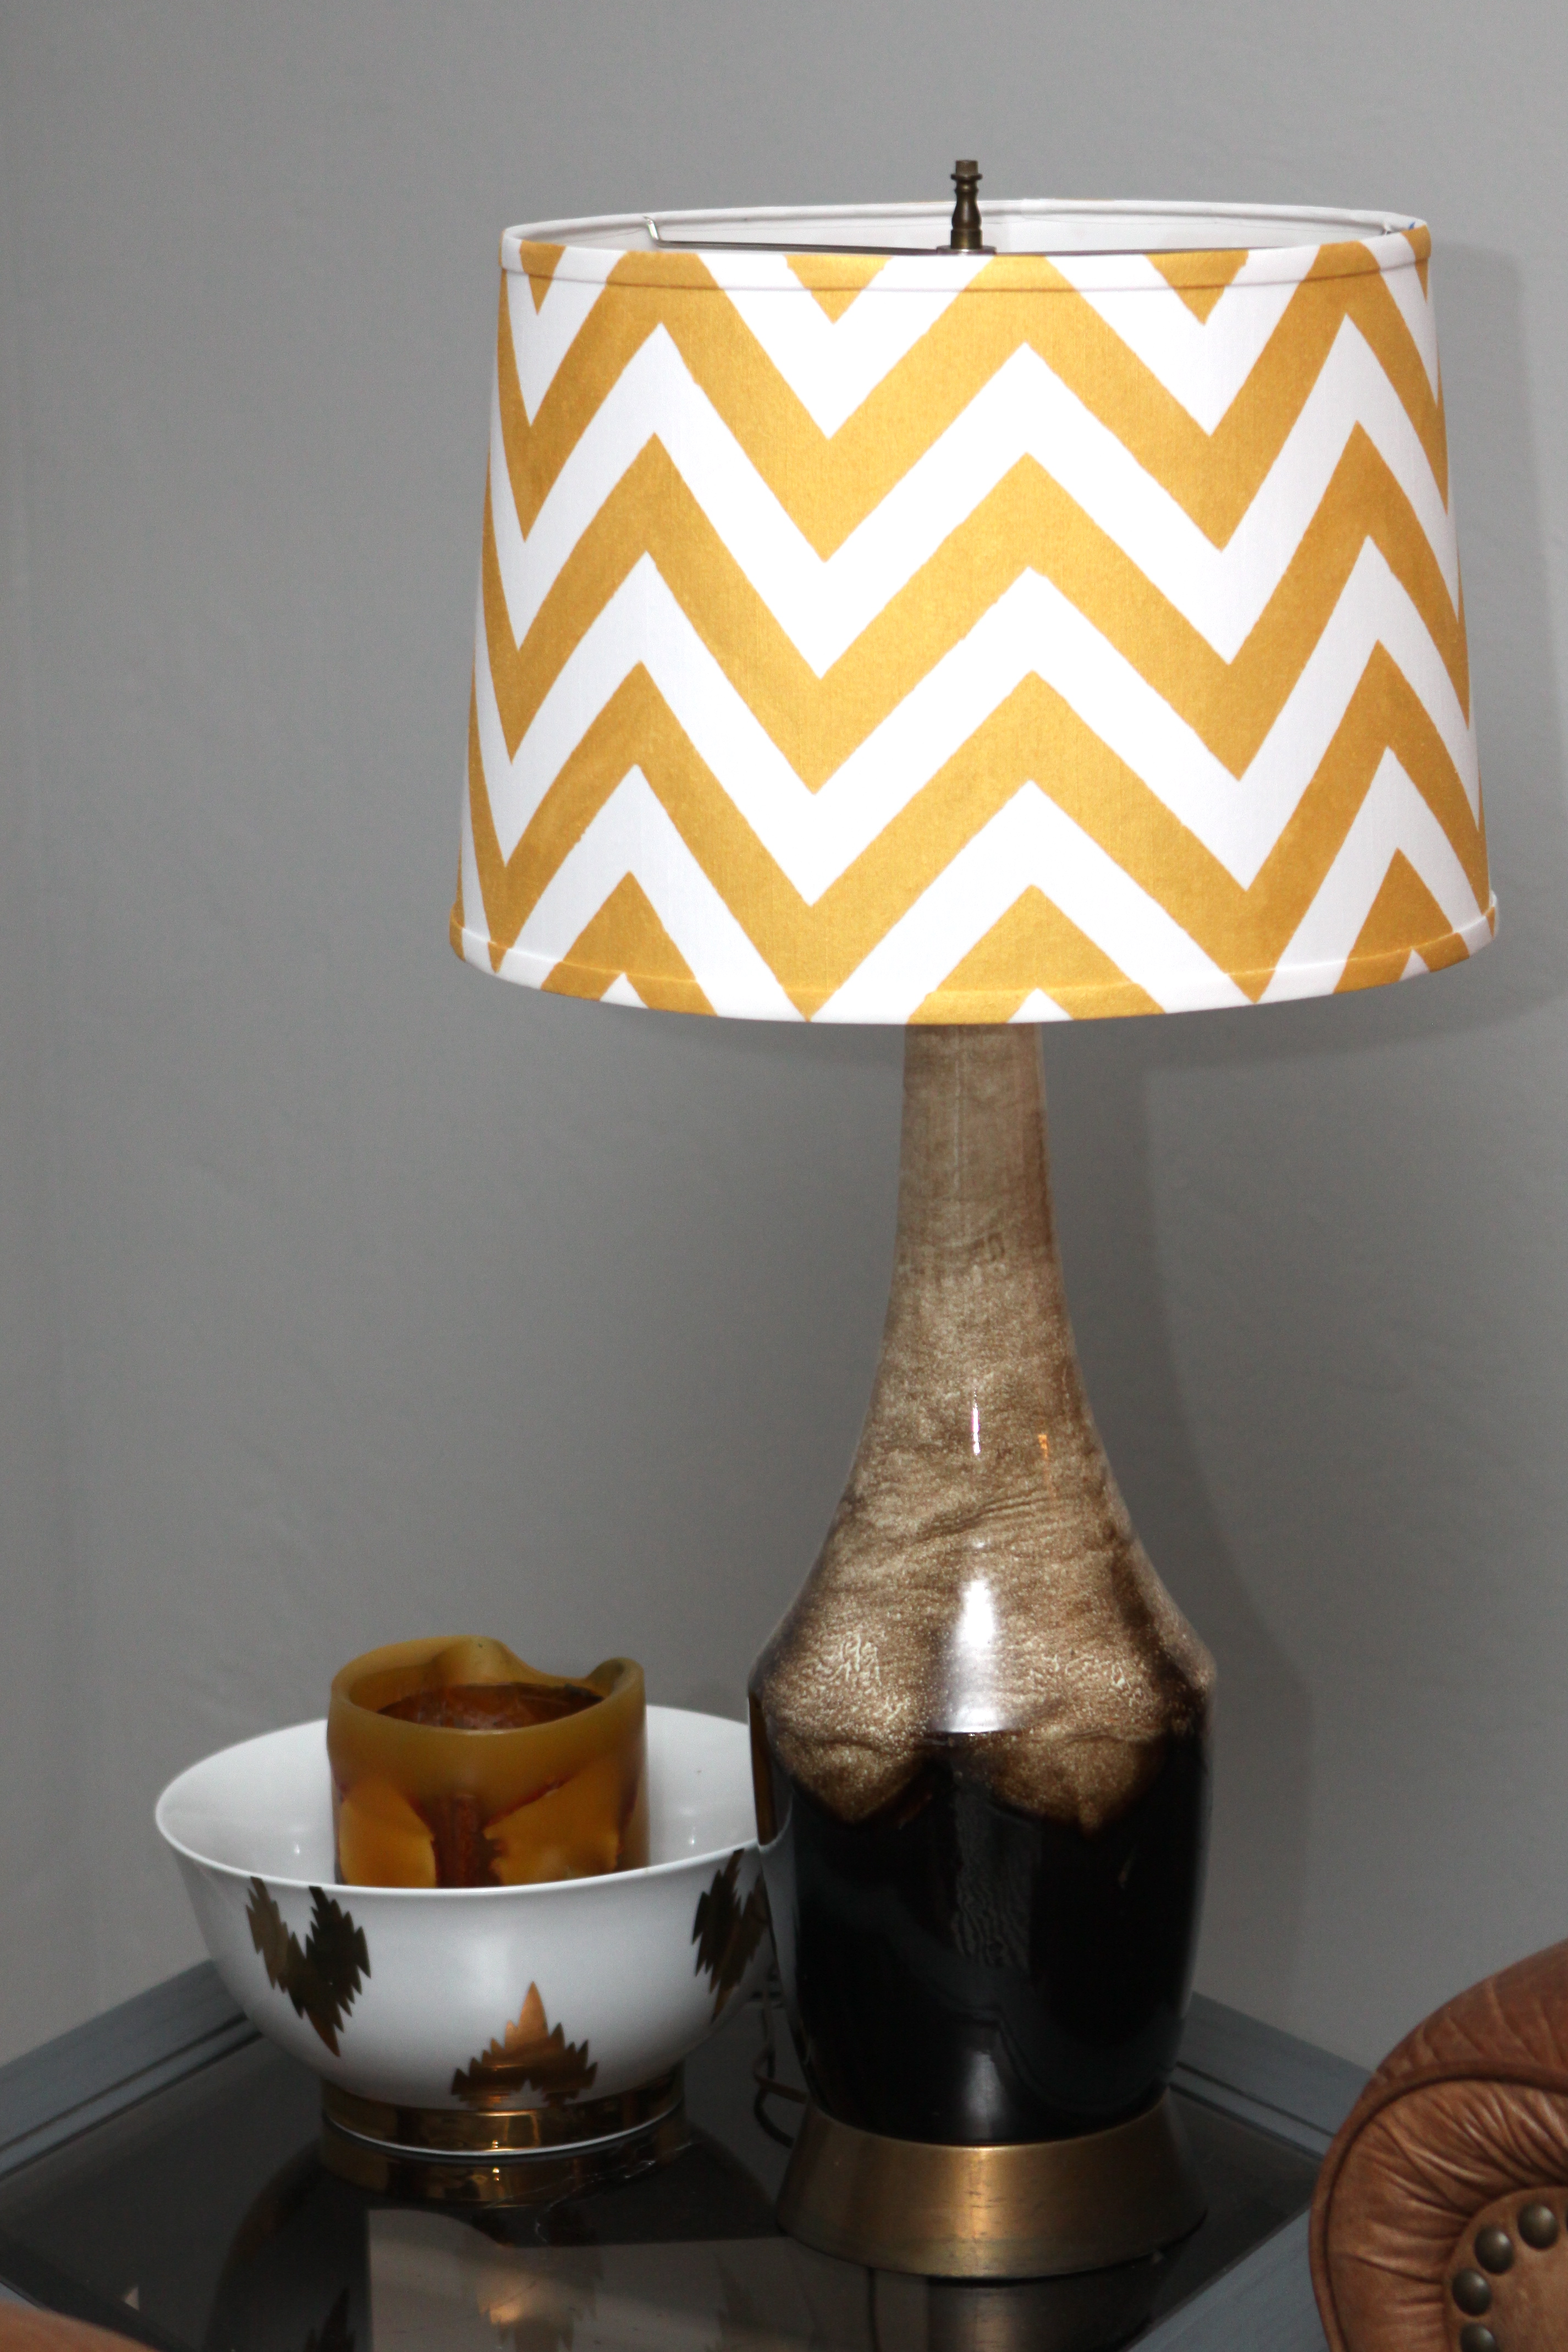 23 Ways To Diy And Redo A Lampshade, Homemade Table Lamp Shades Only